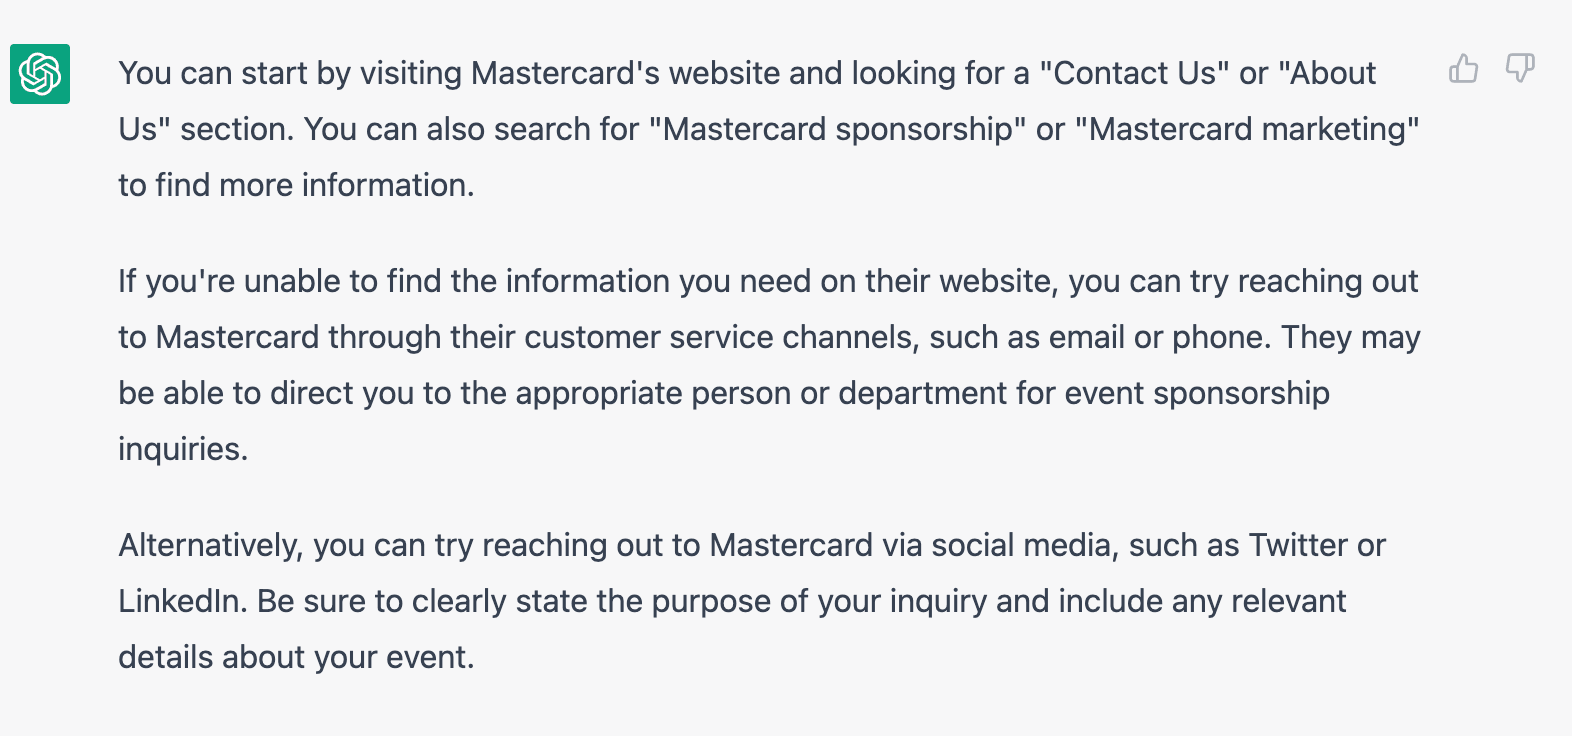 ChatGPT response for how to reach mastercard to sponsor an event